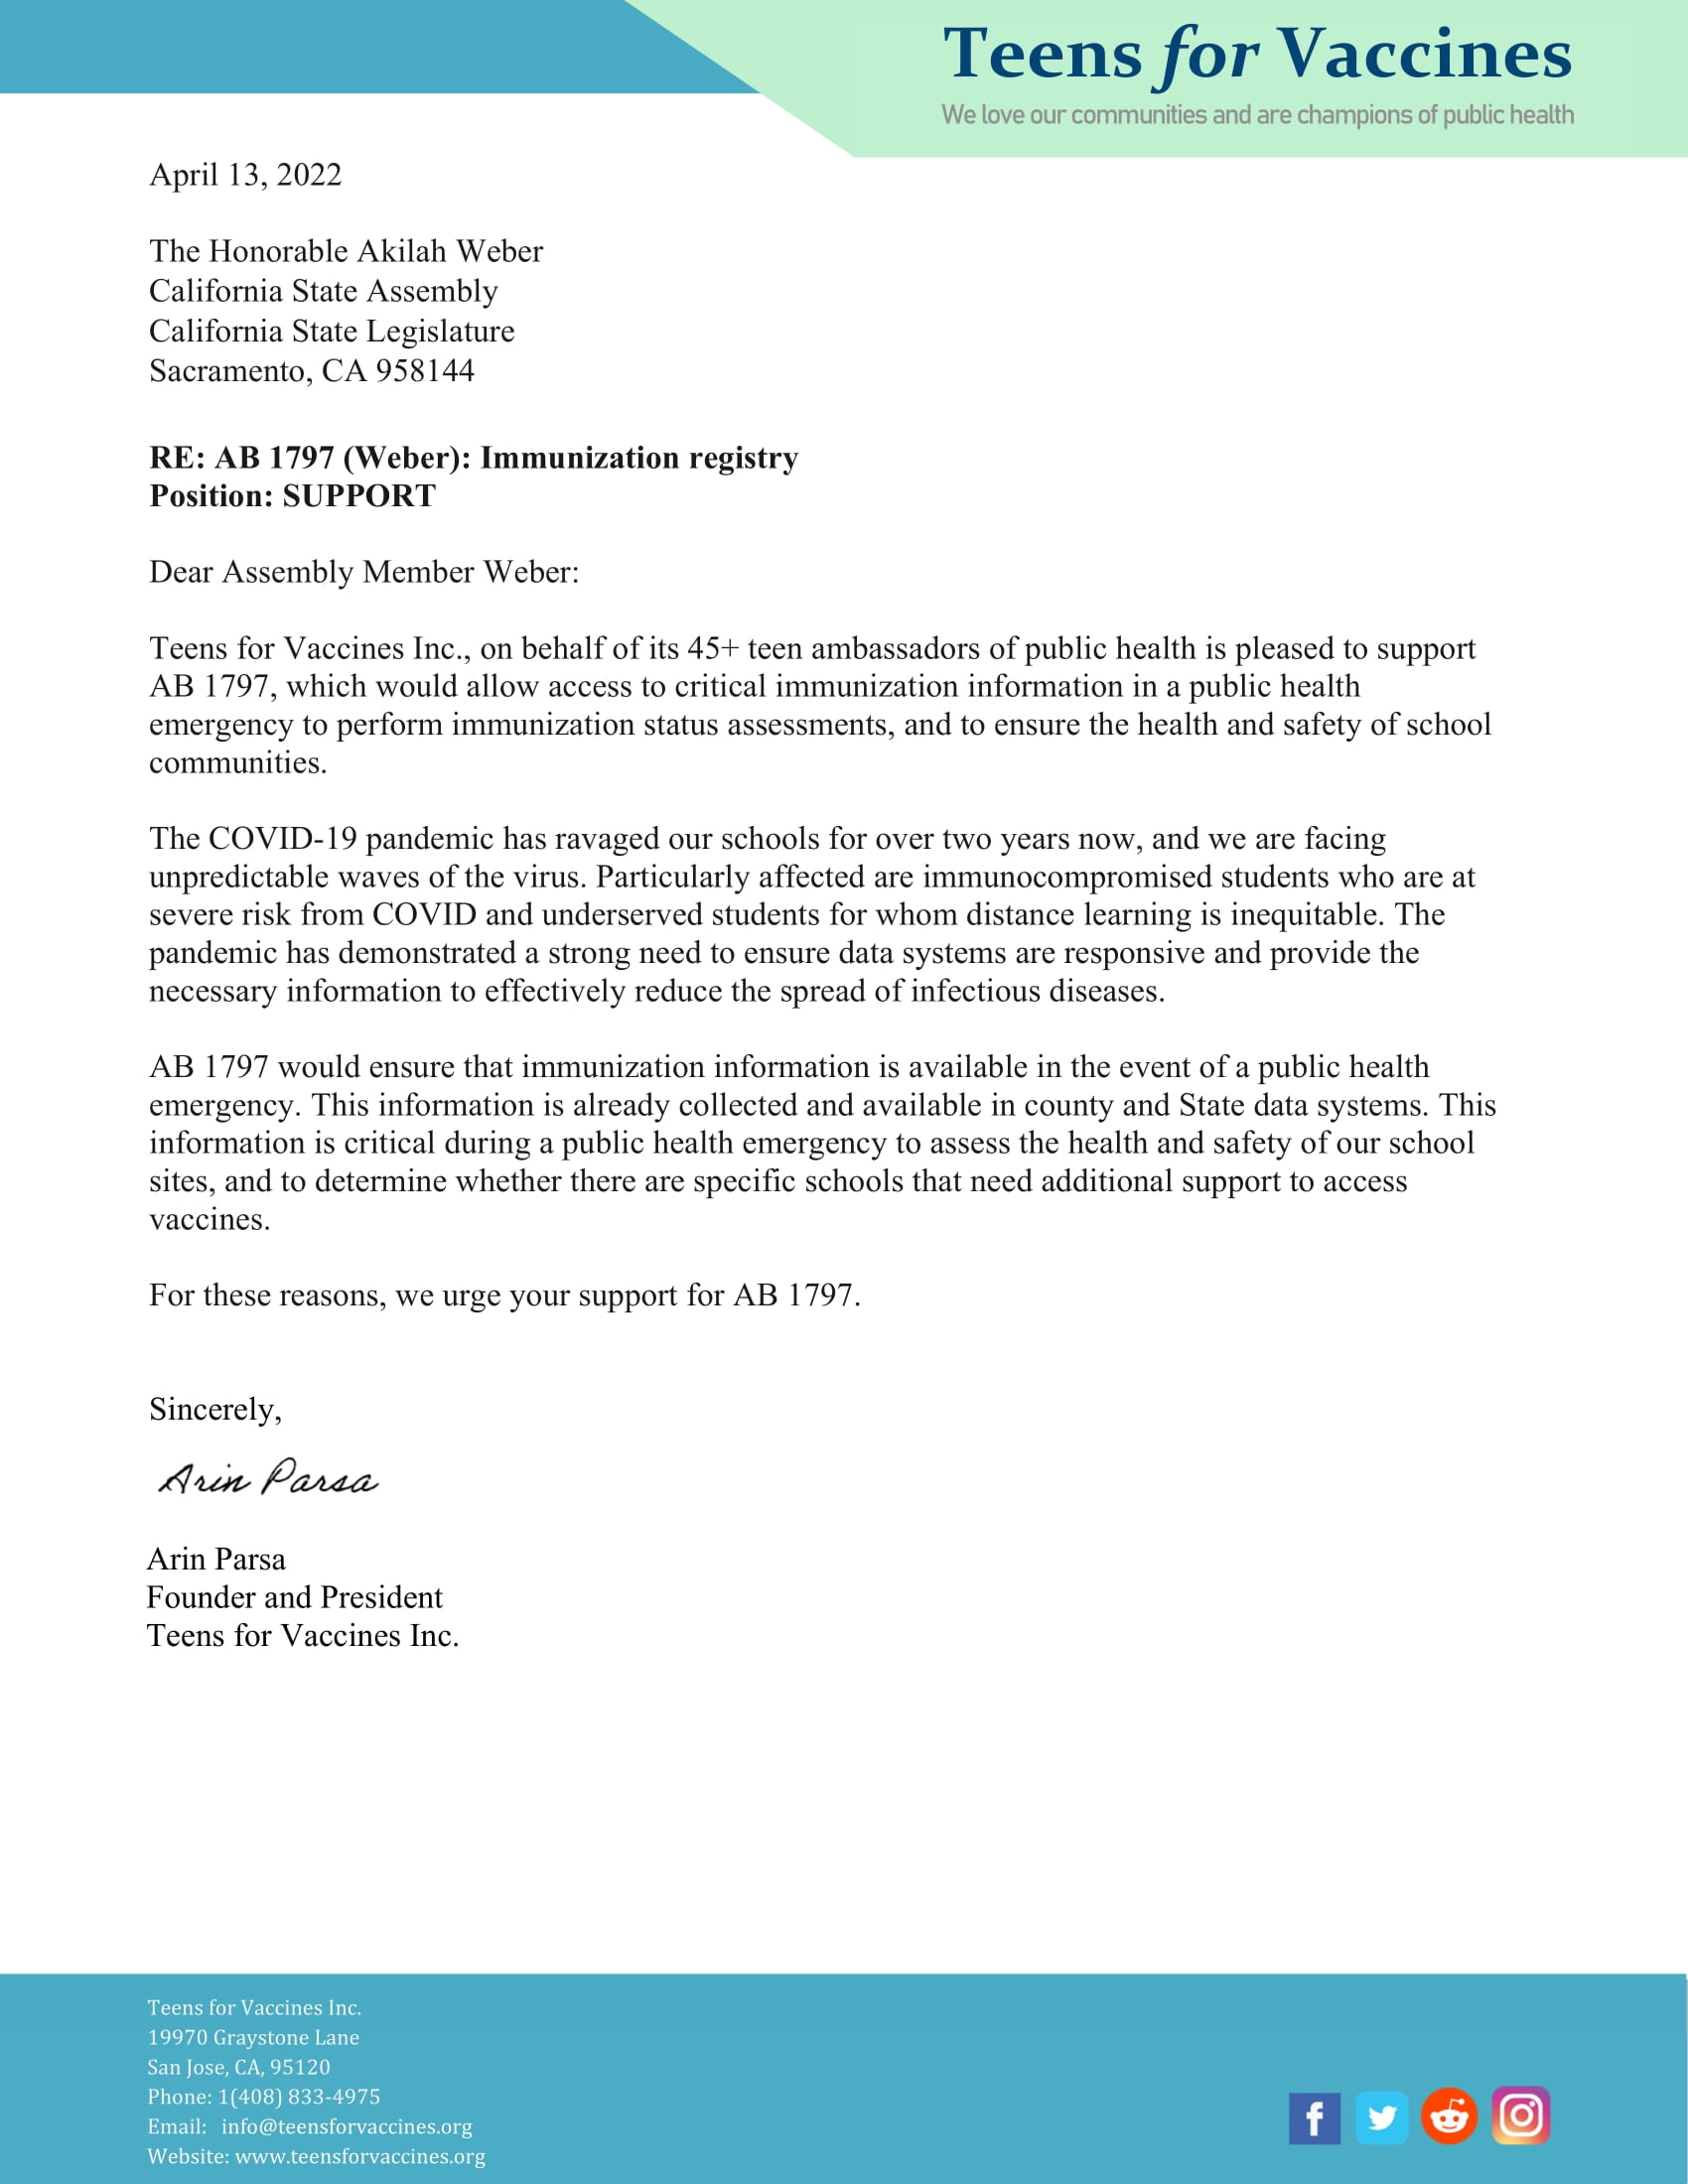 AB 1797 Support Letter - Teens for Vaccines-1